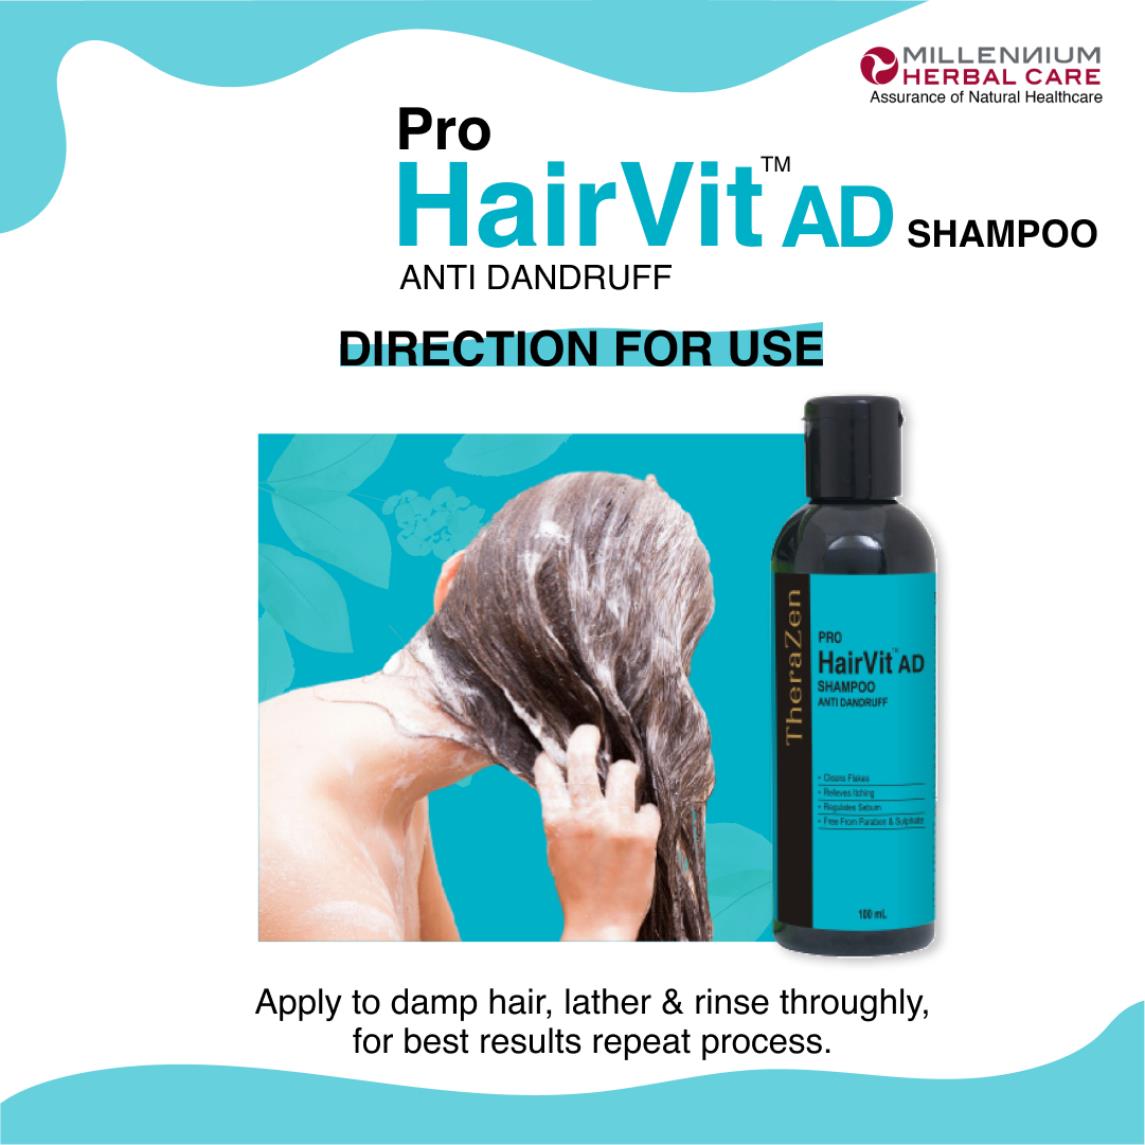 Direction of Use for Pro Hairvit AD Shampoo